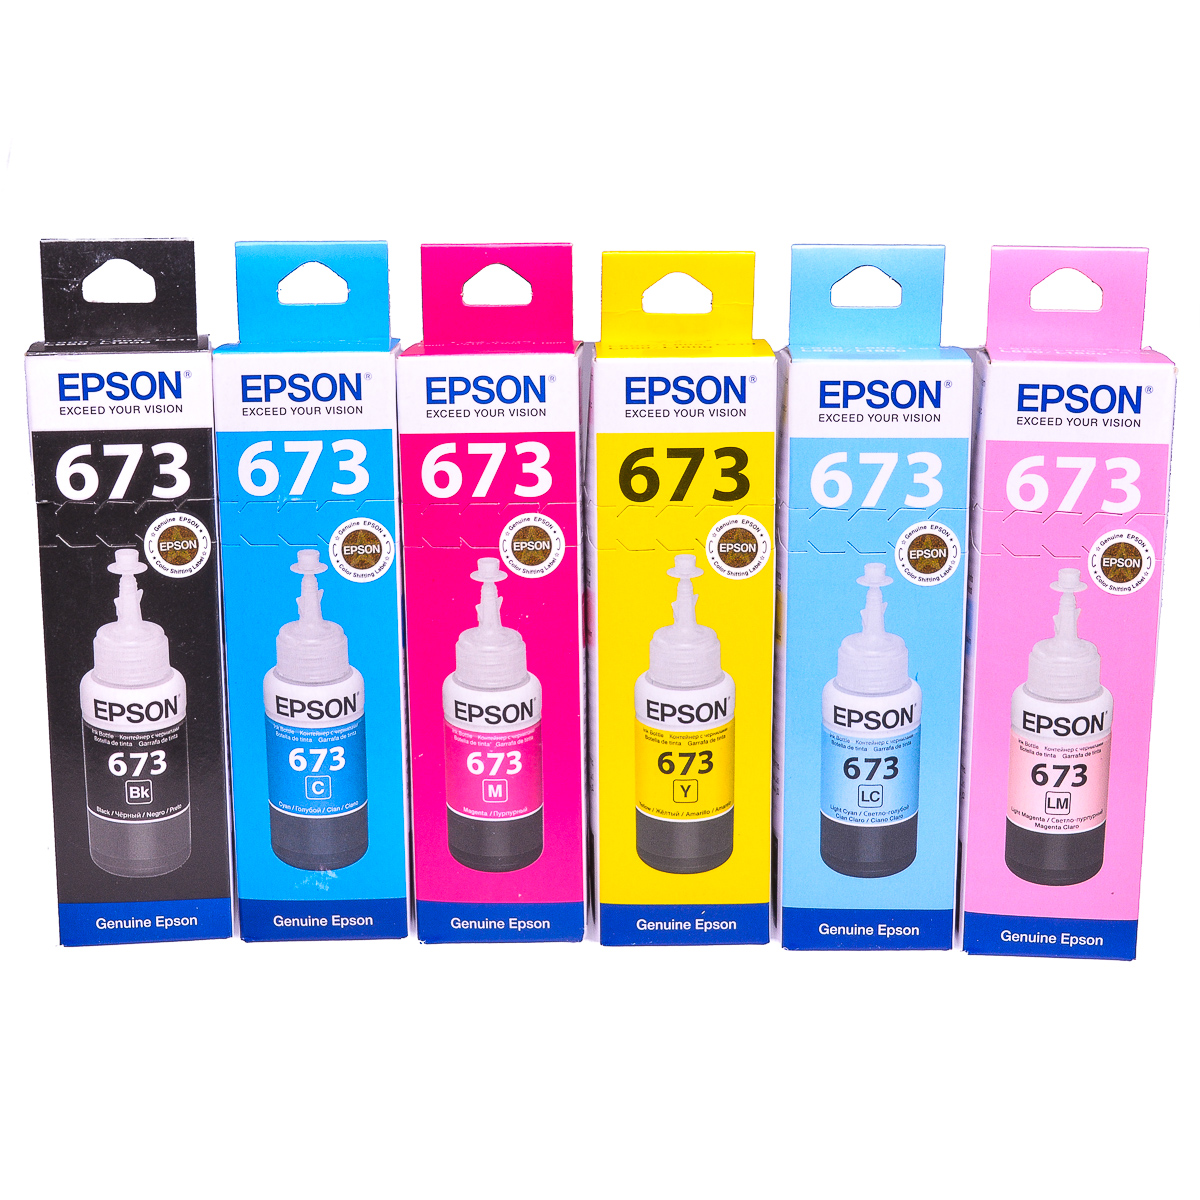 Genuine Multipack ink refill for use with Epson L805 printer